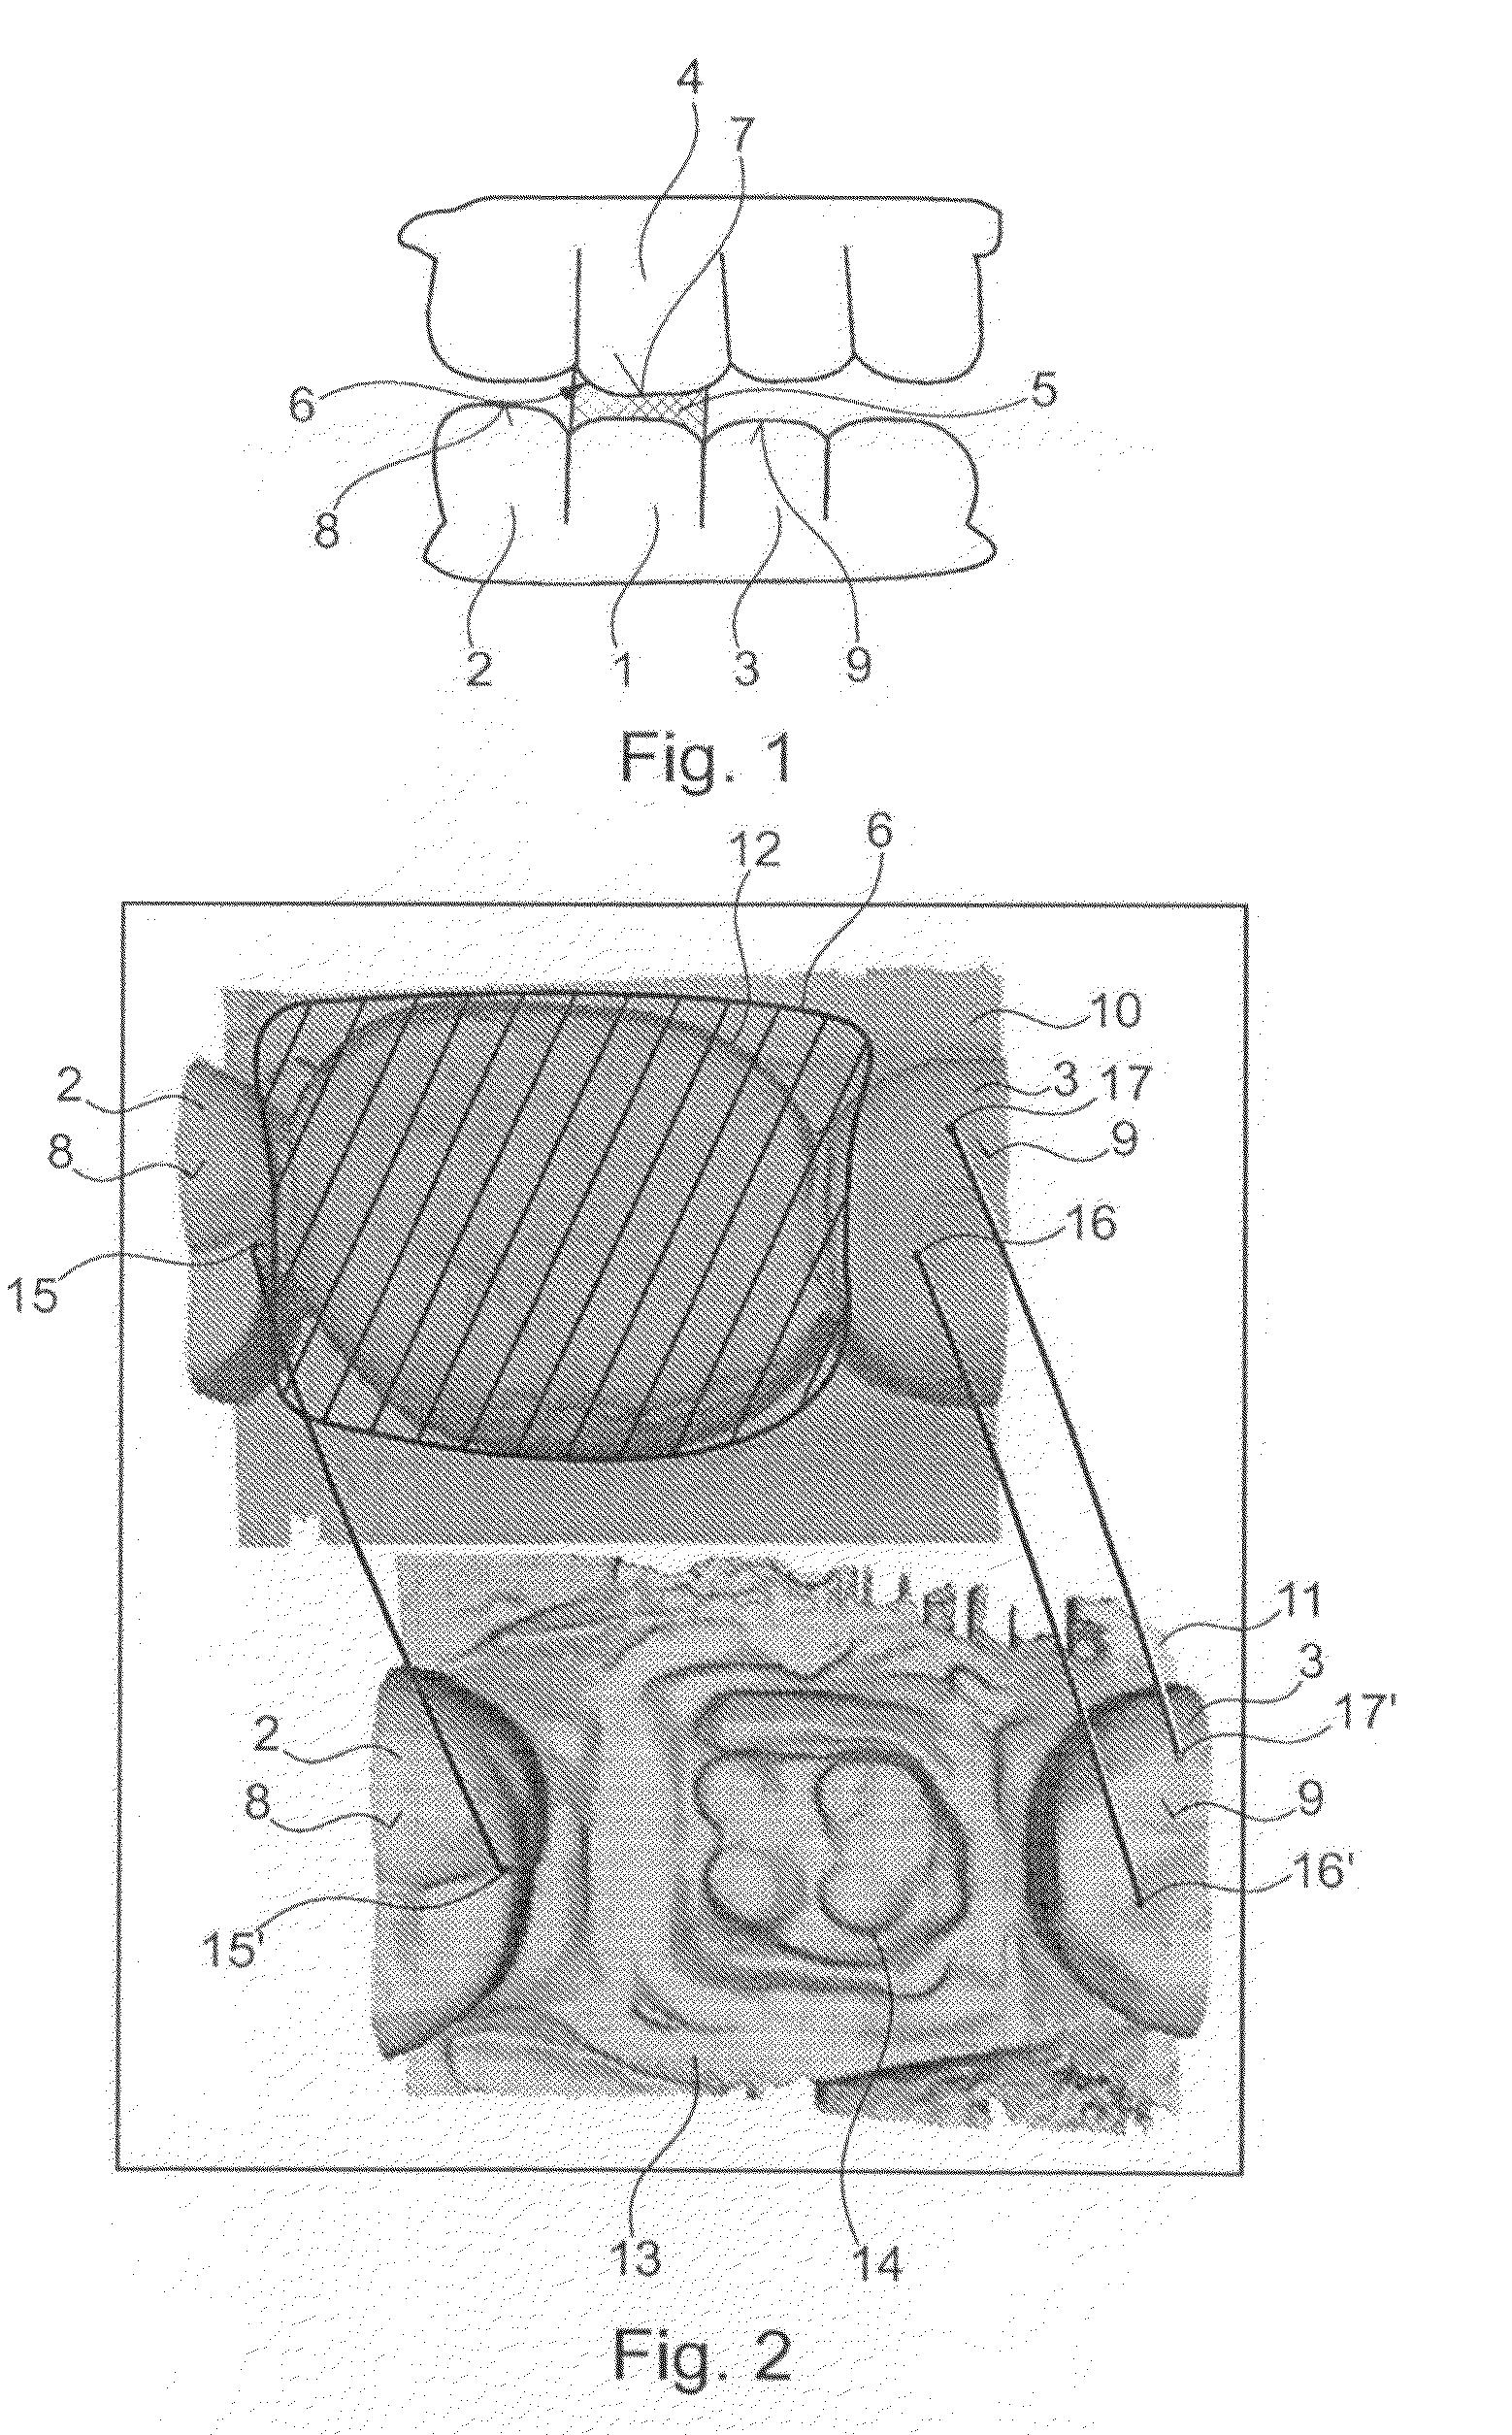 Method for checking a preparation of a prepared tooth with cad methods